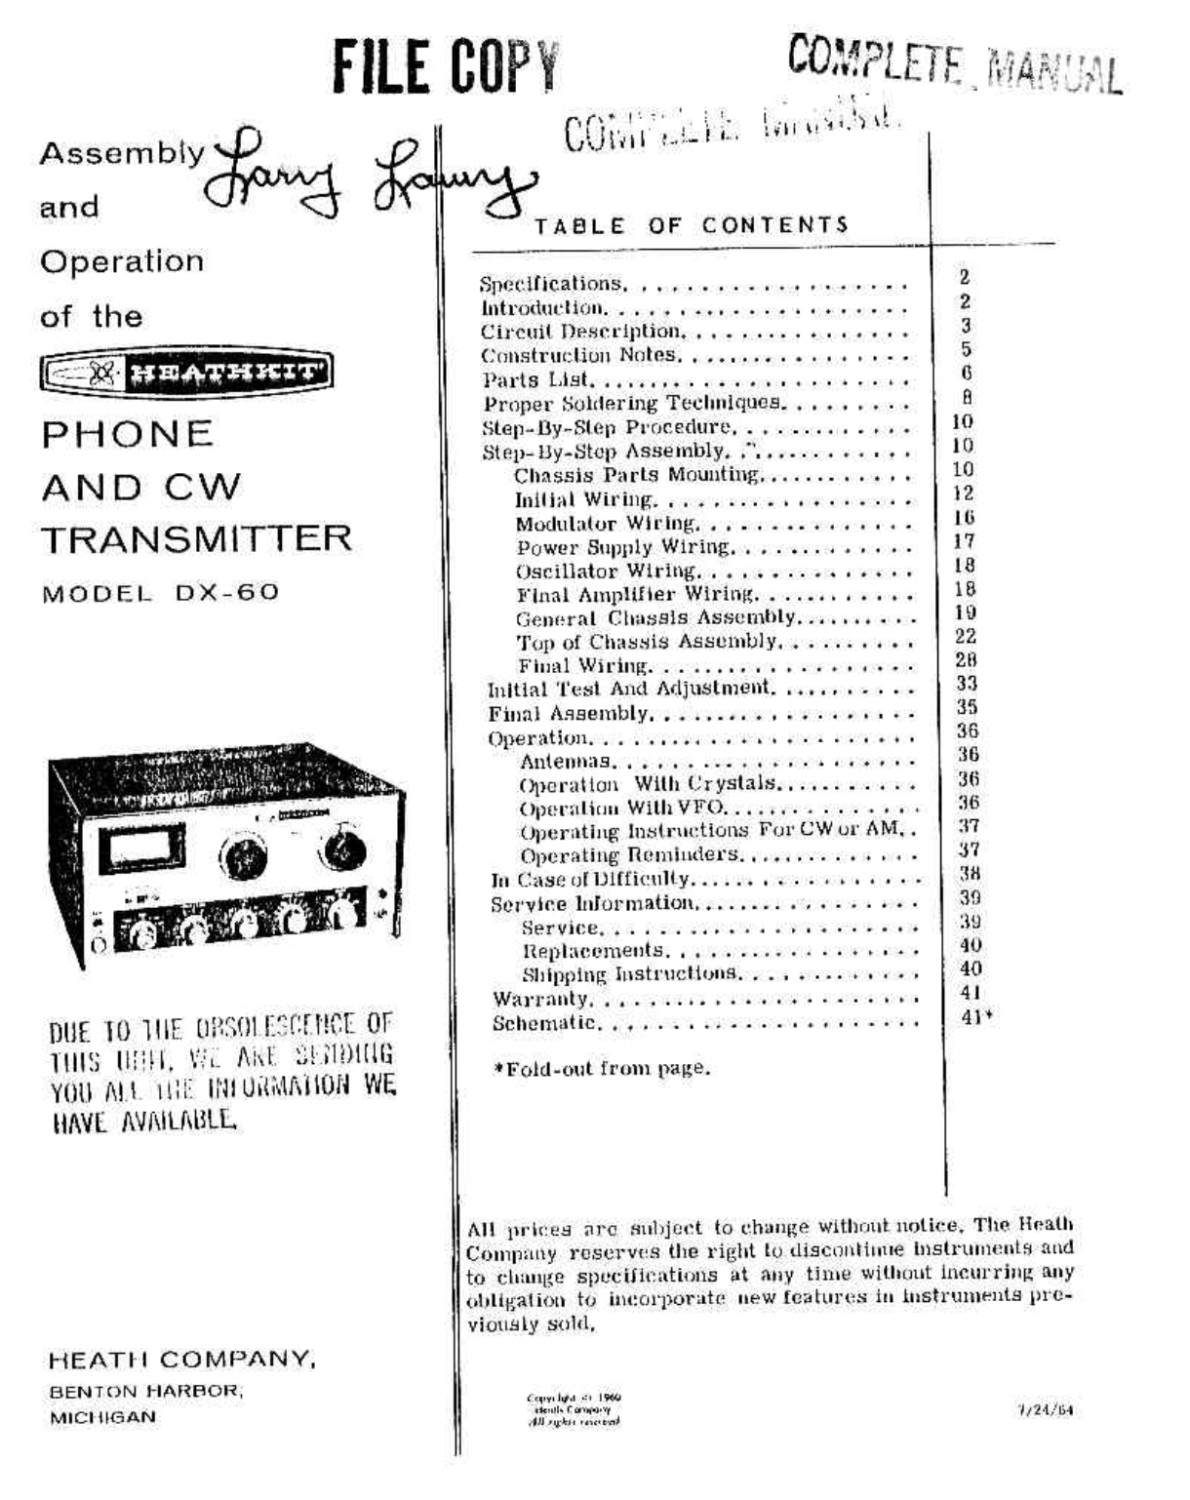 Heathkit DX-60 Phone and CW Transmitter - Assembly Manual 2